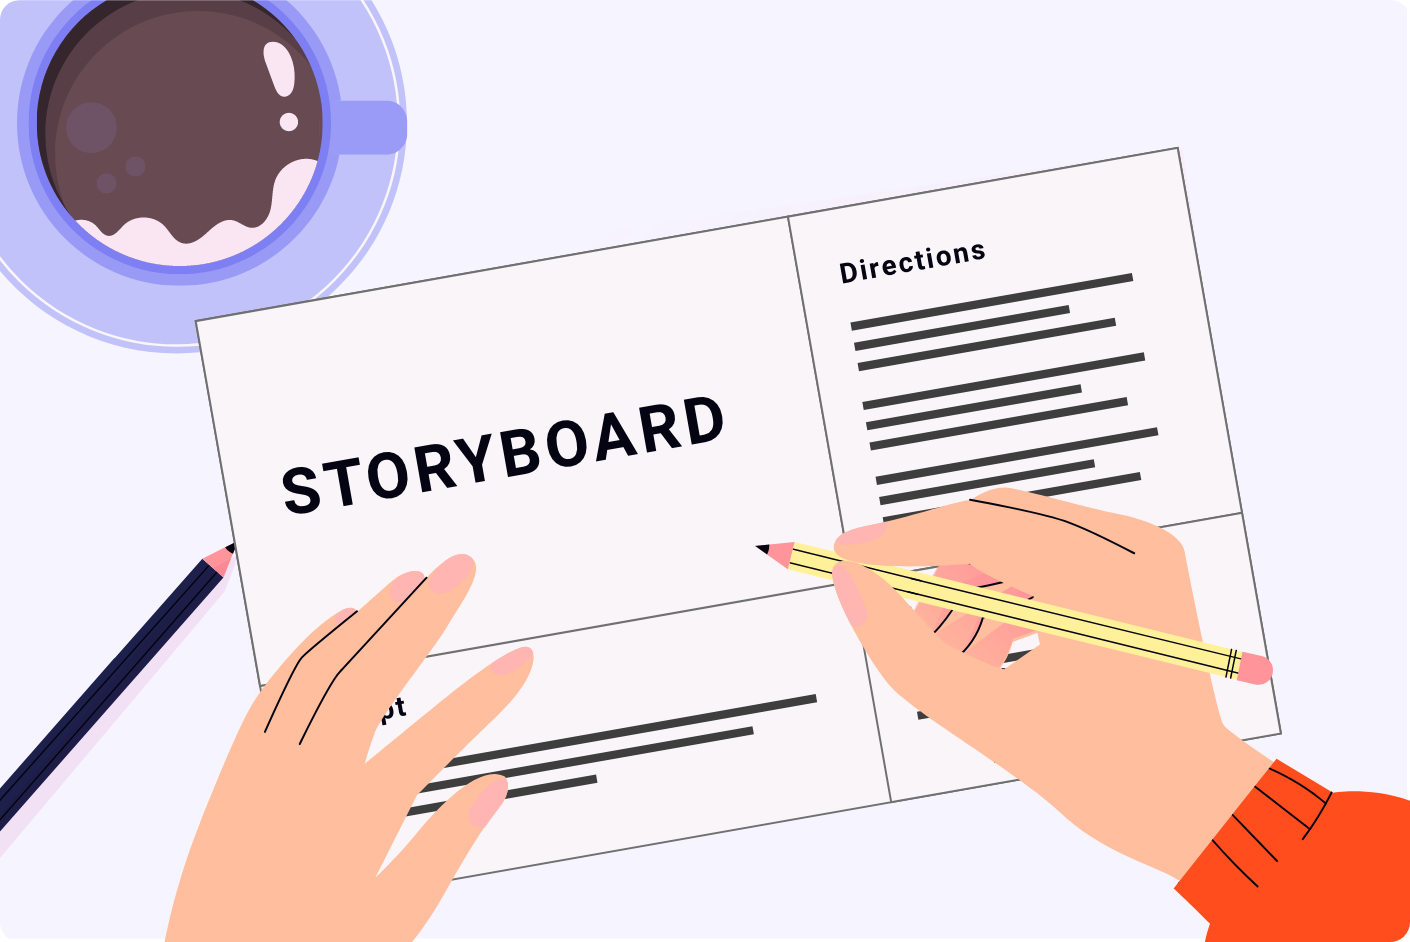 Download our free storyboard template and create the storyboard for your short animated video to save money on your production budget.